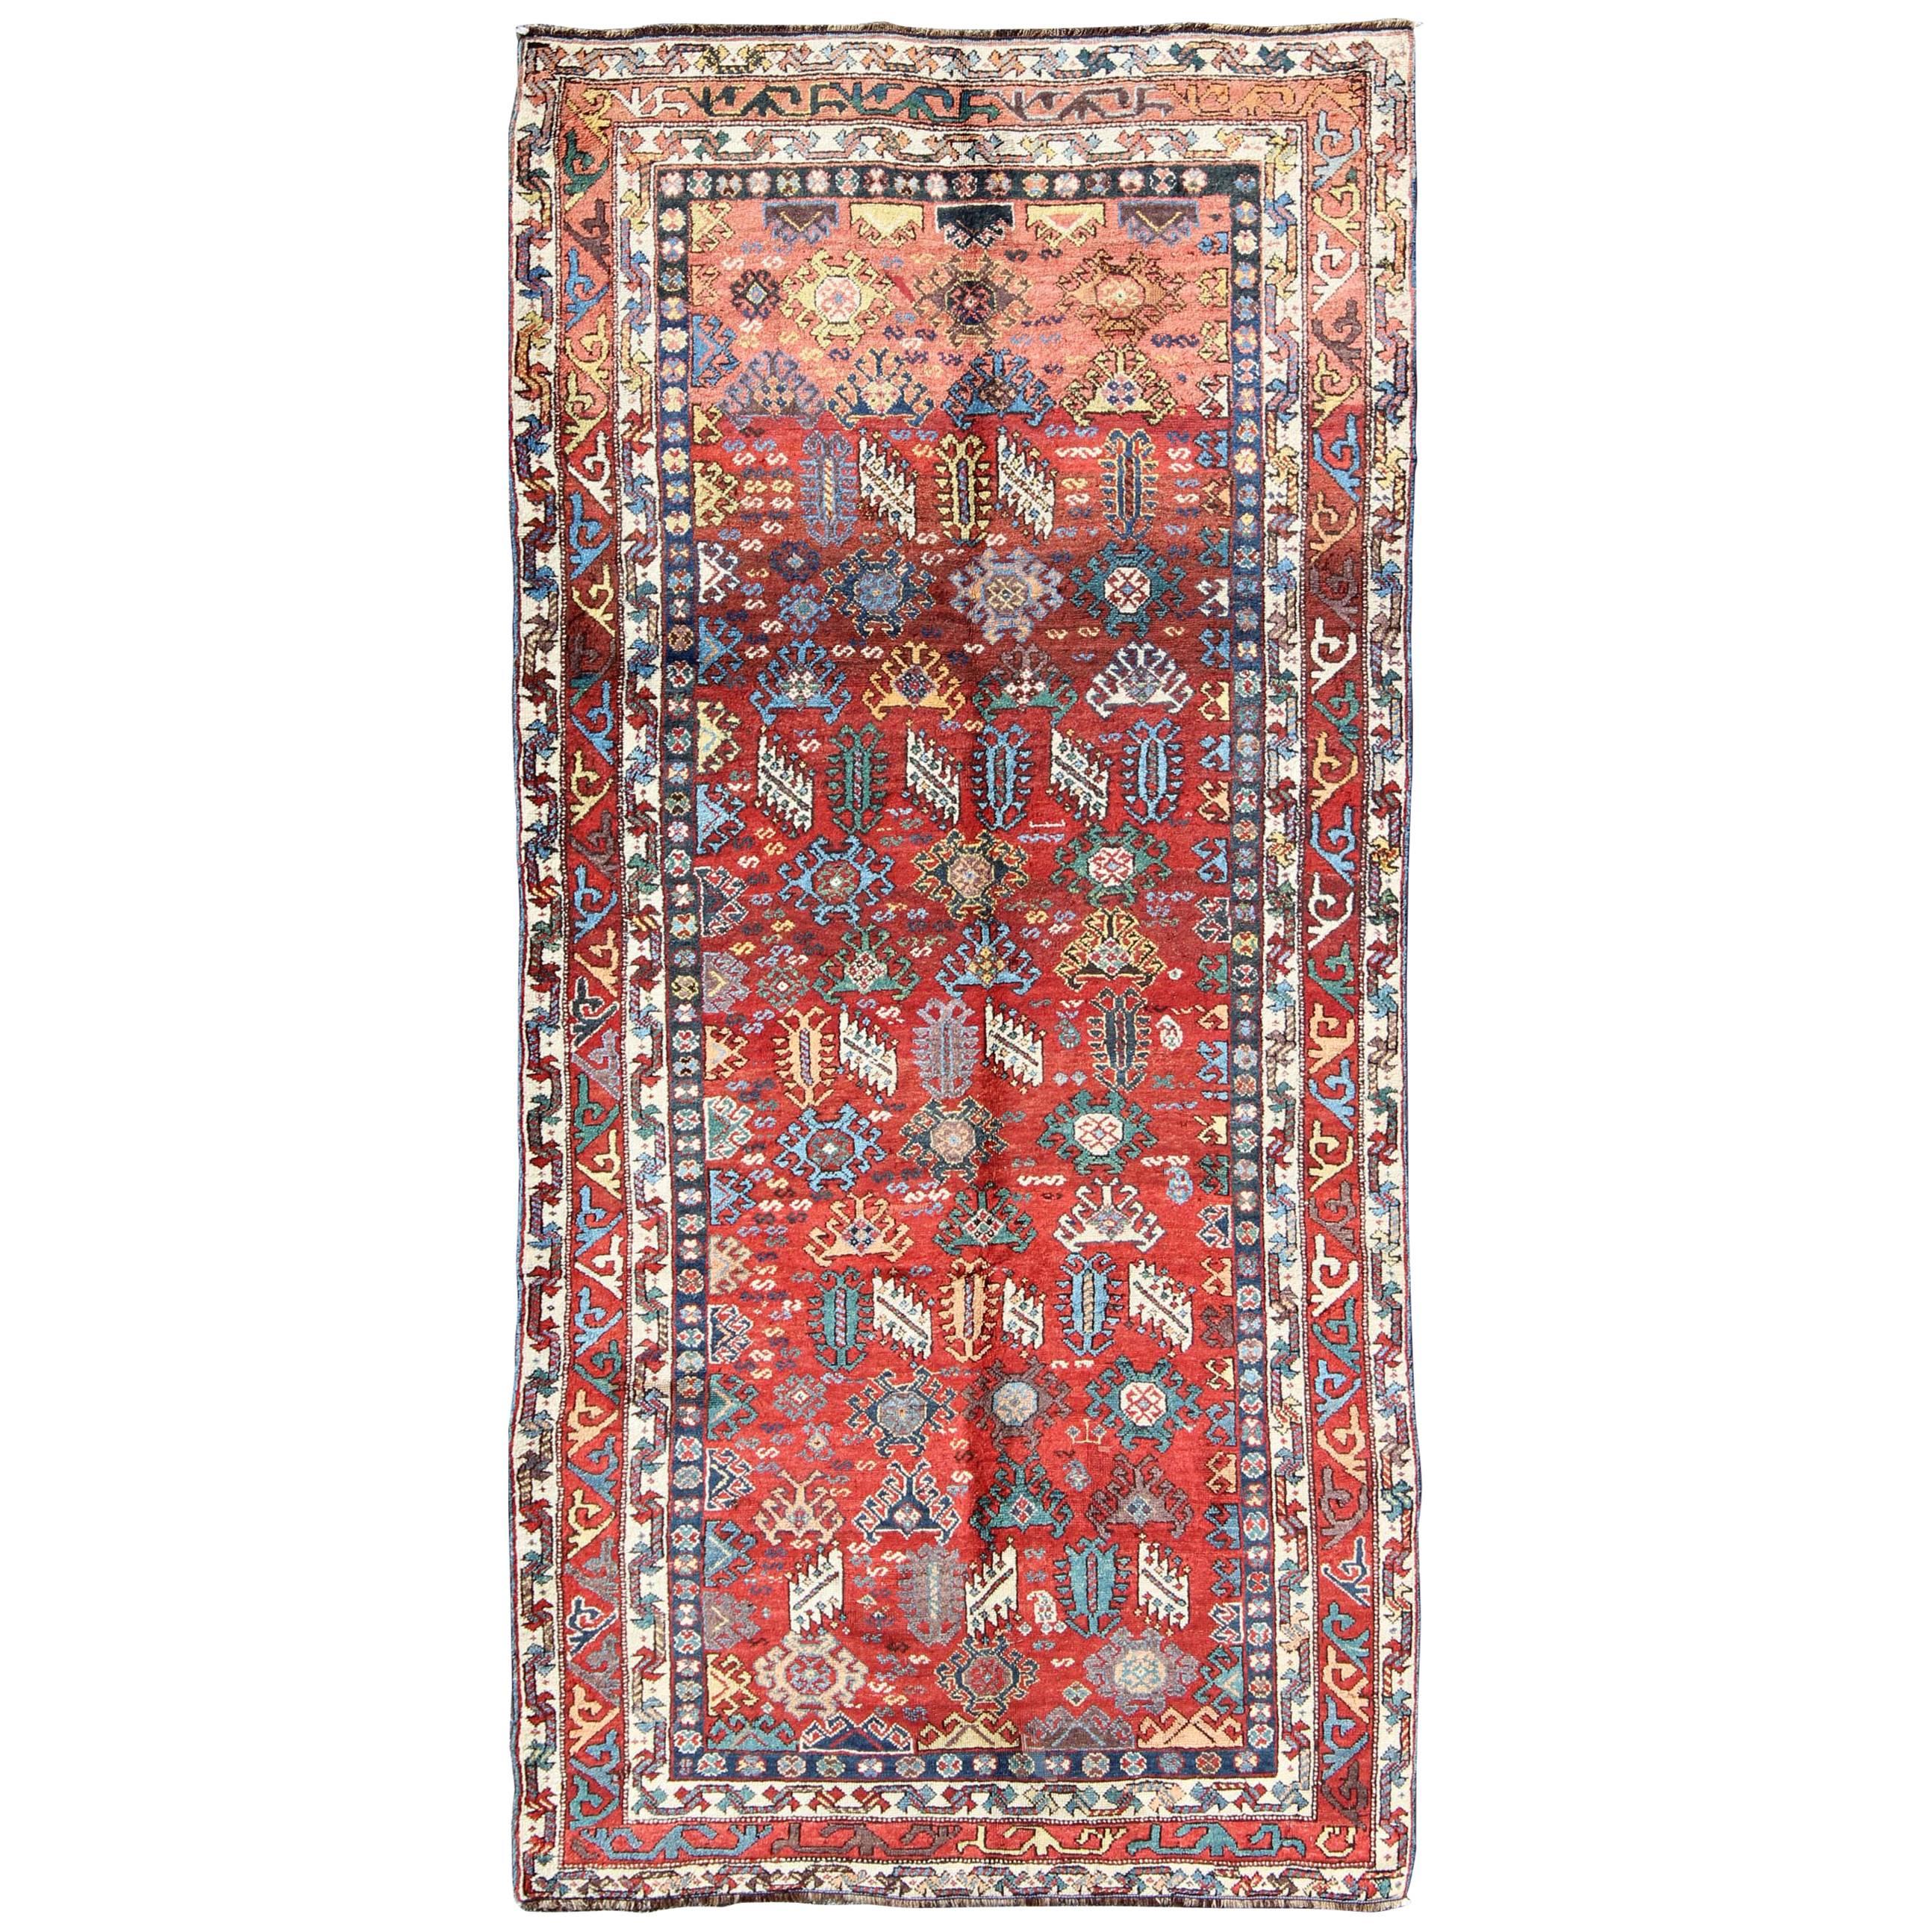 Antique Qashqai Persian Rug with All-Over Sub-Geometric Design and Tiered Border